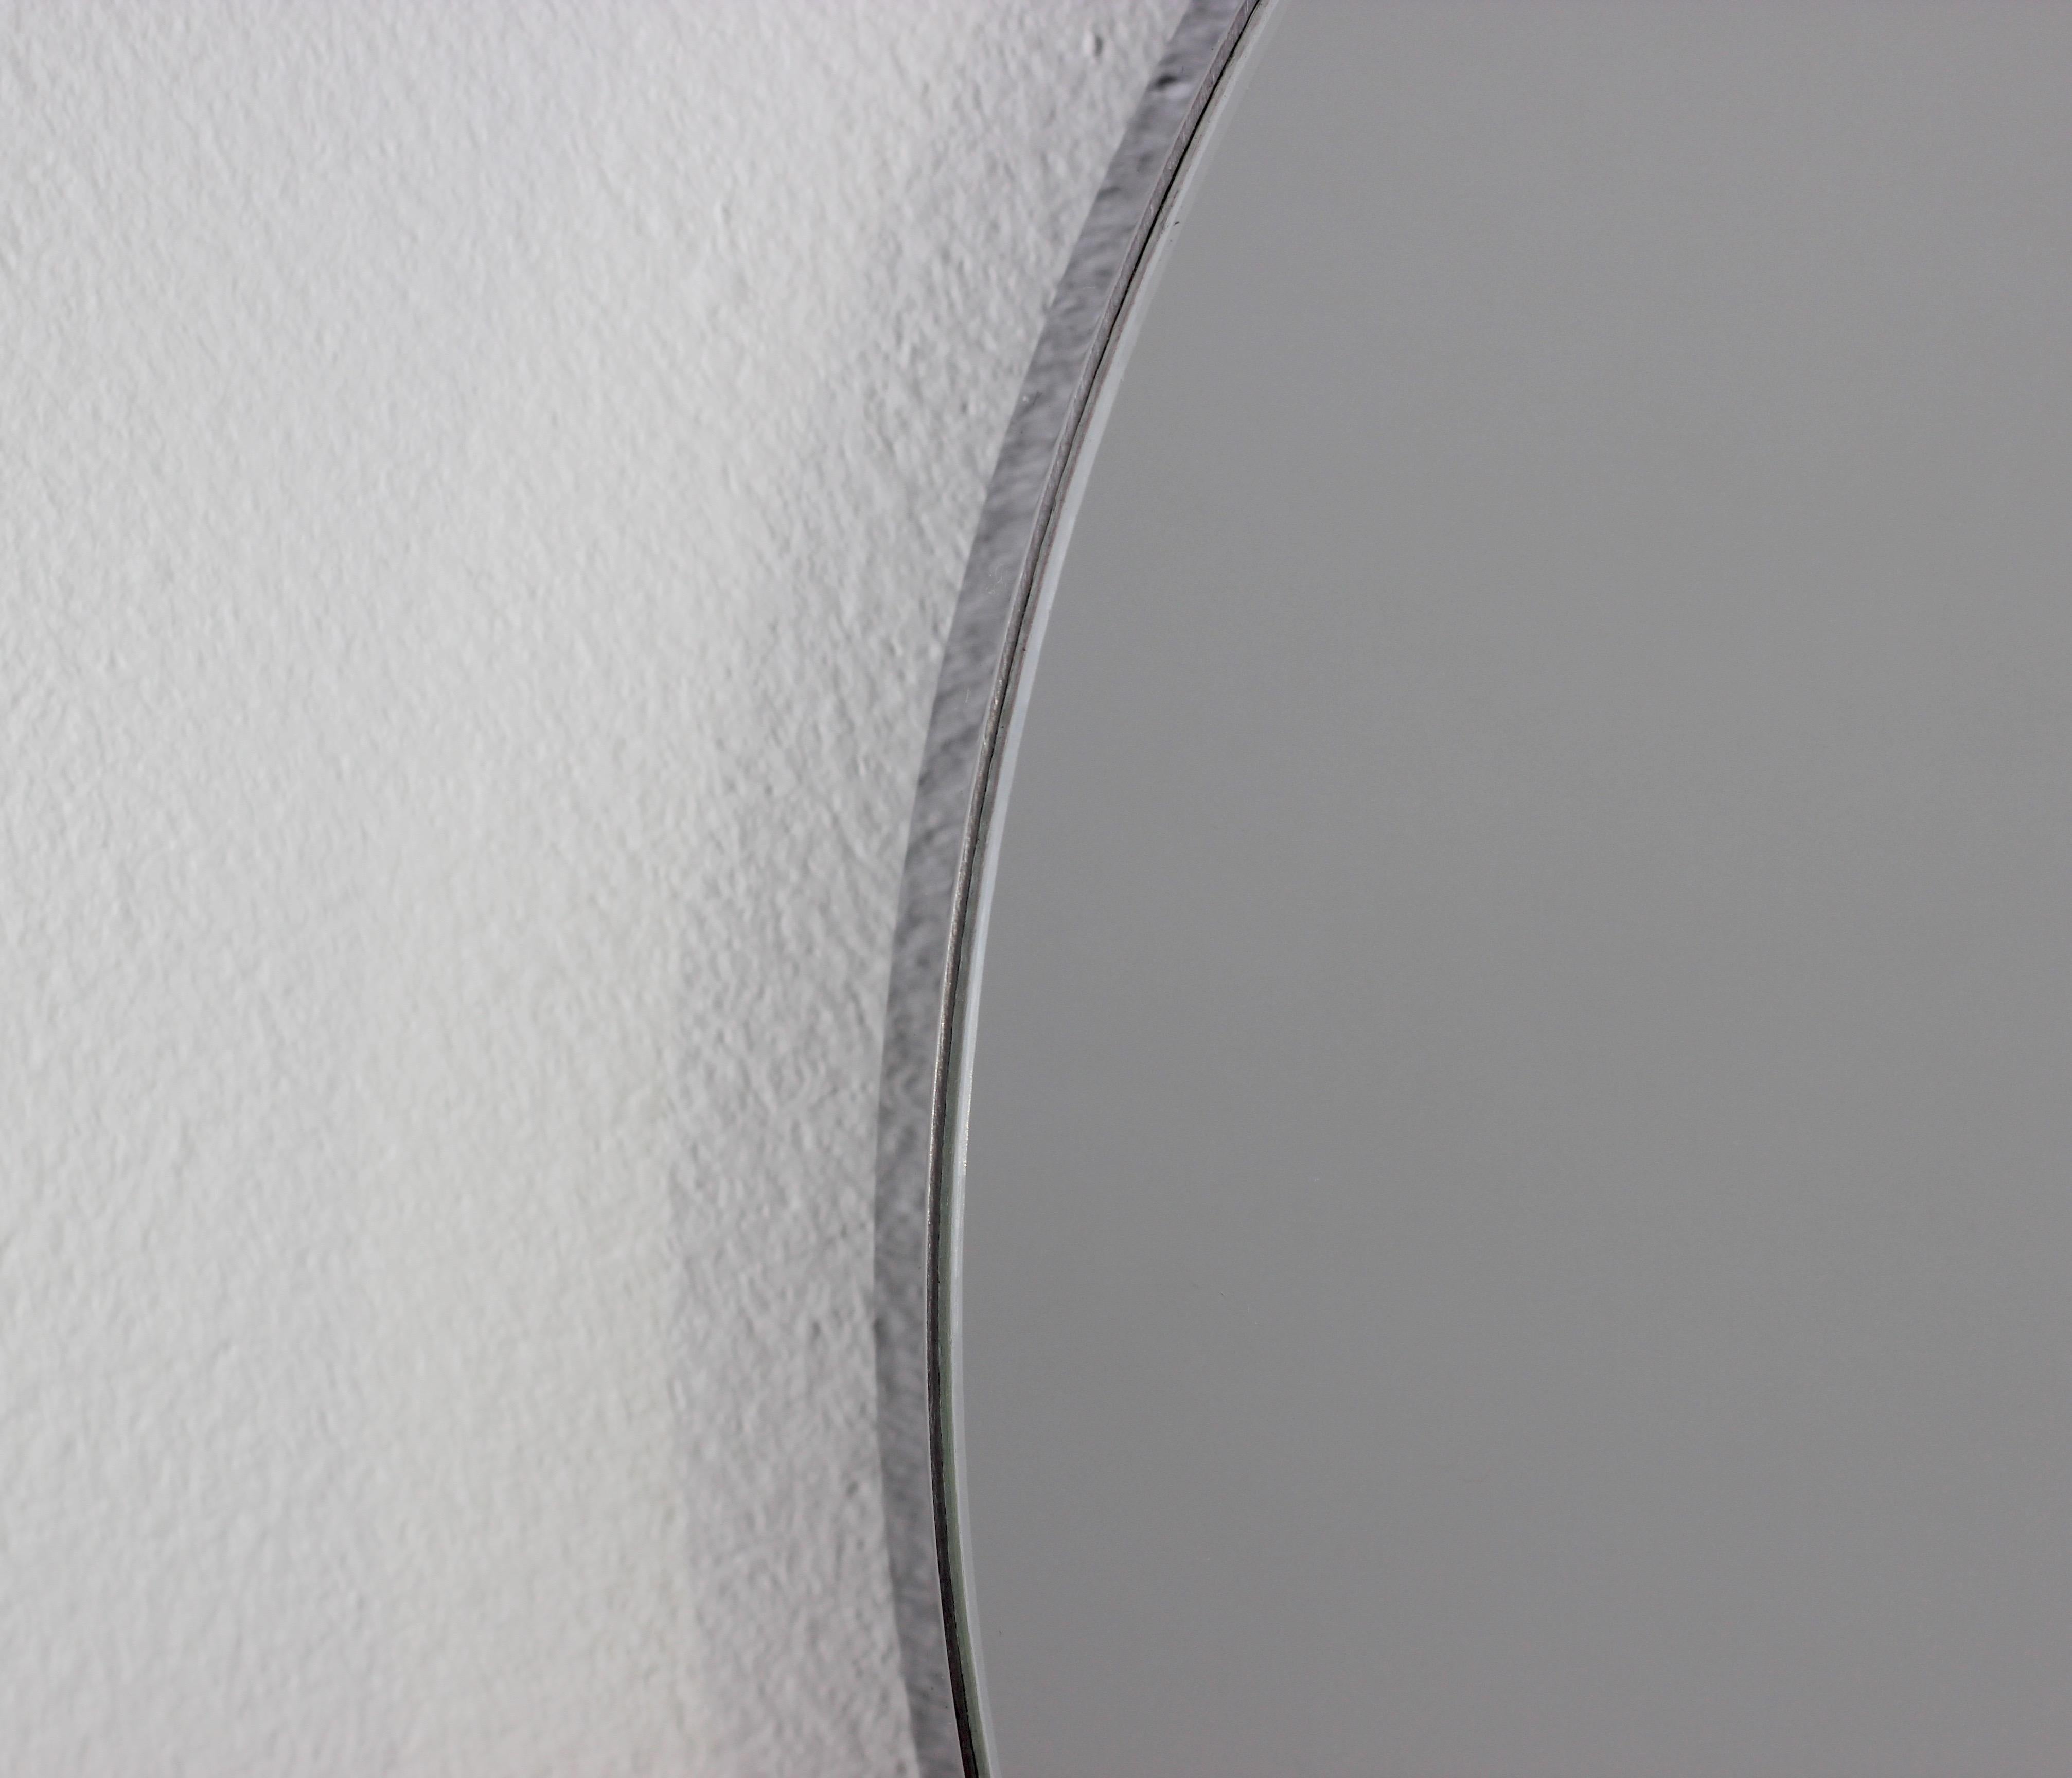 Brushed Orbis Round Handcrafted Mirror with Stainless Steel Frame, Large For Sale